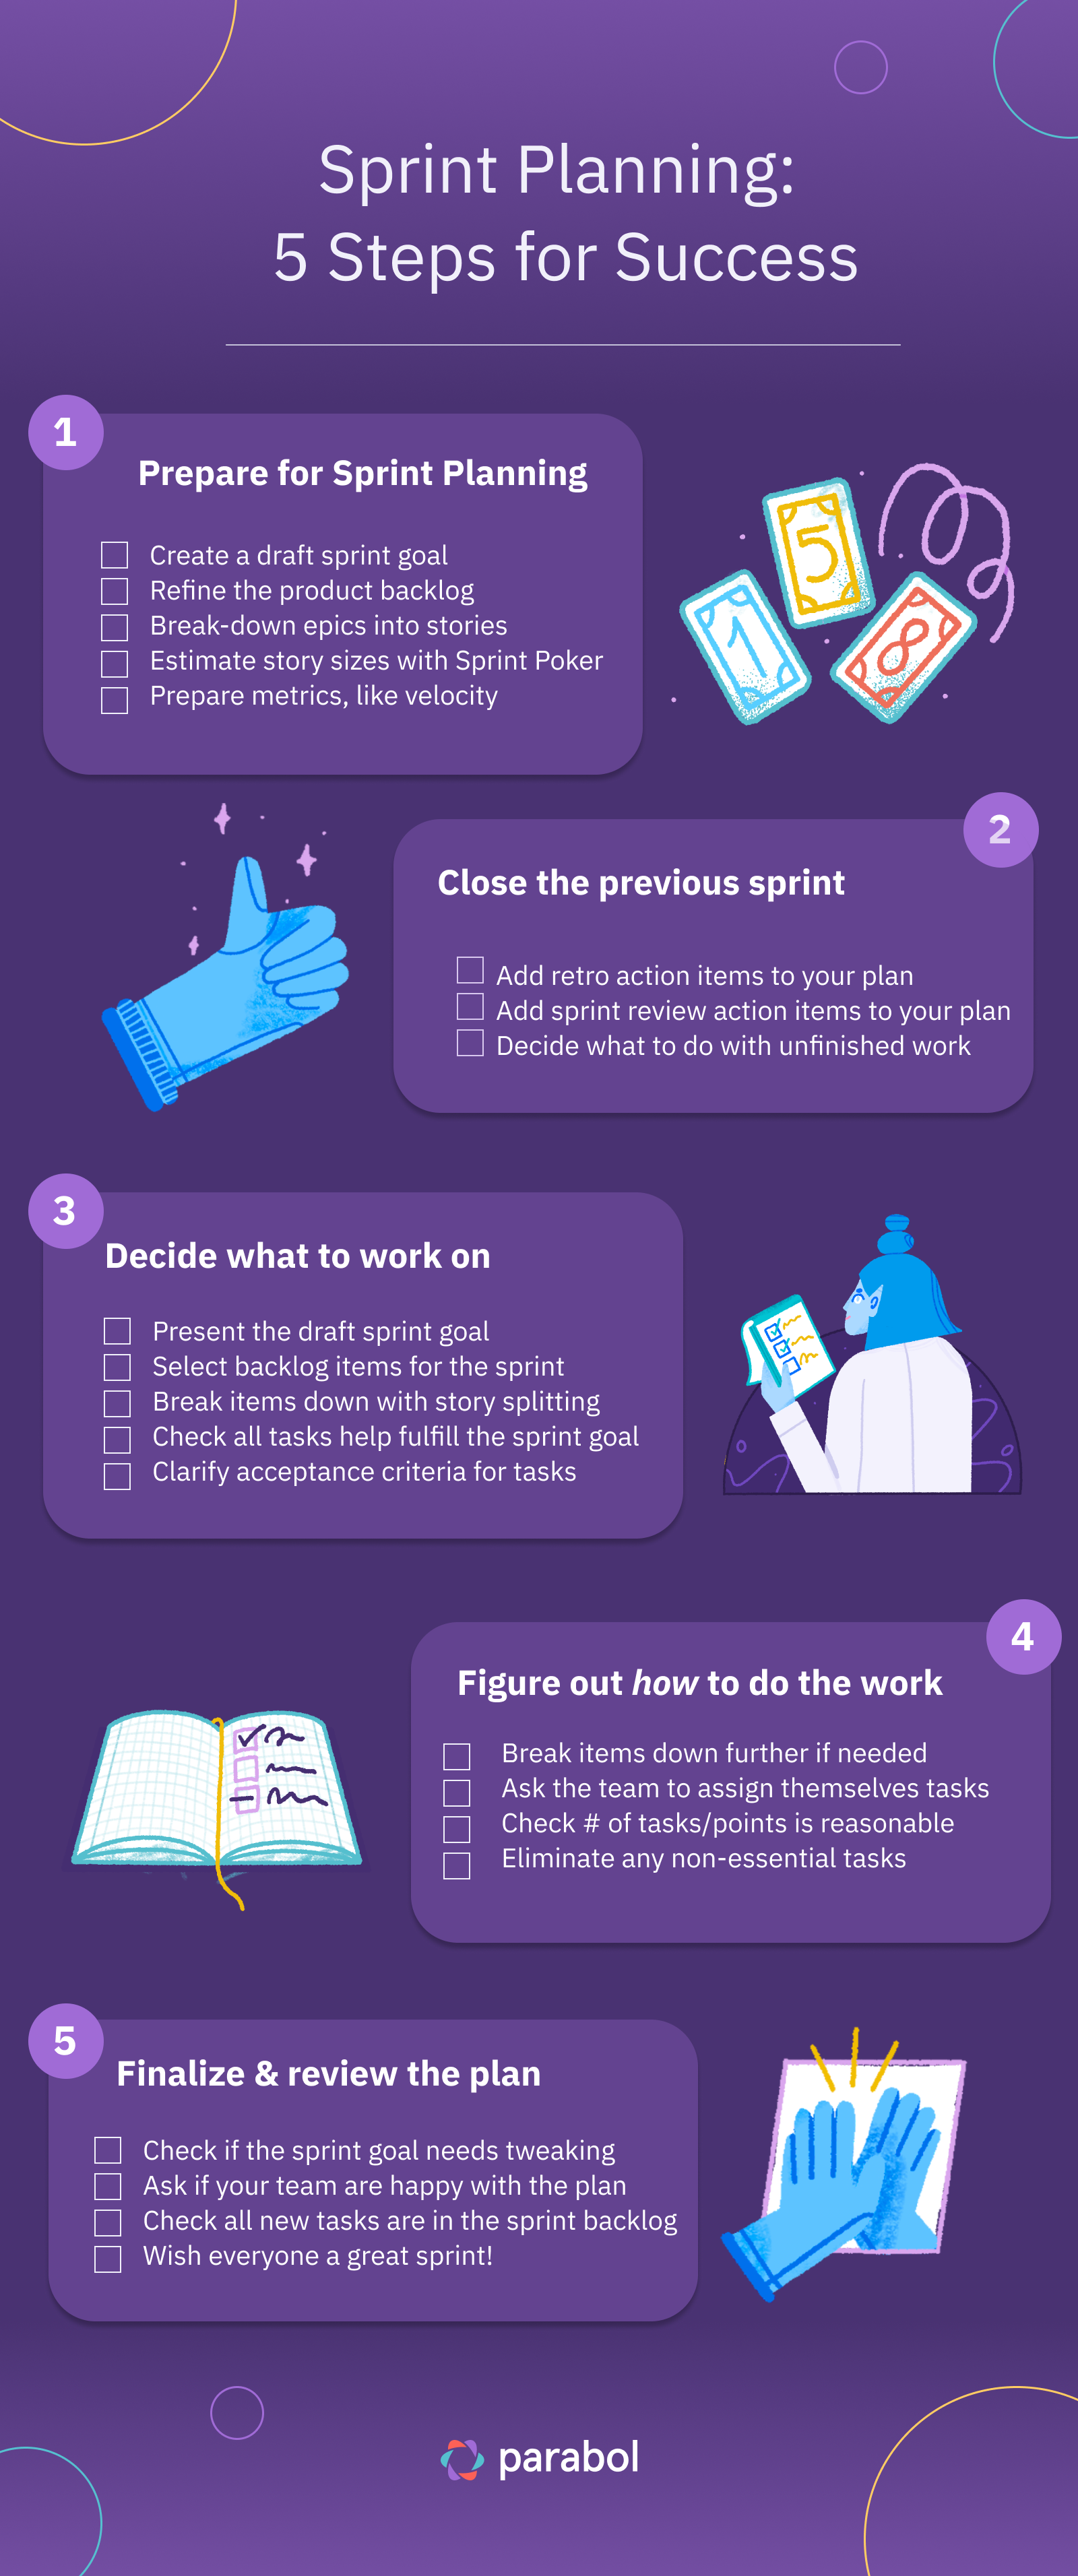 sprint planning 5 step process infographic